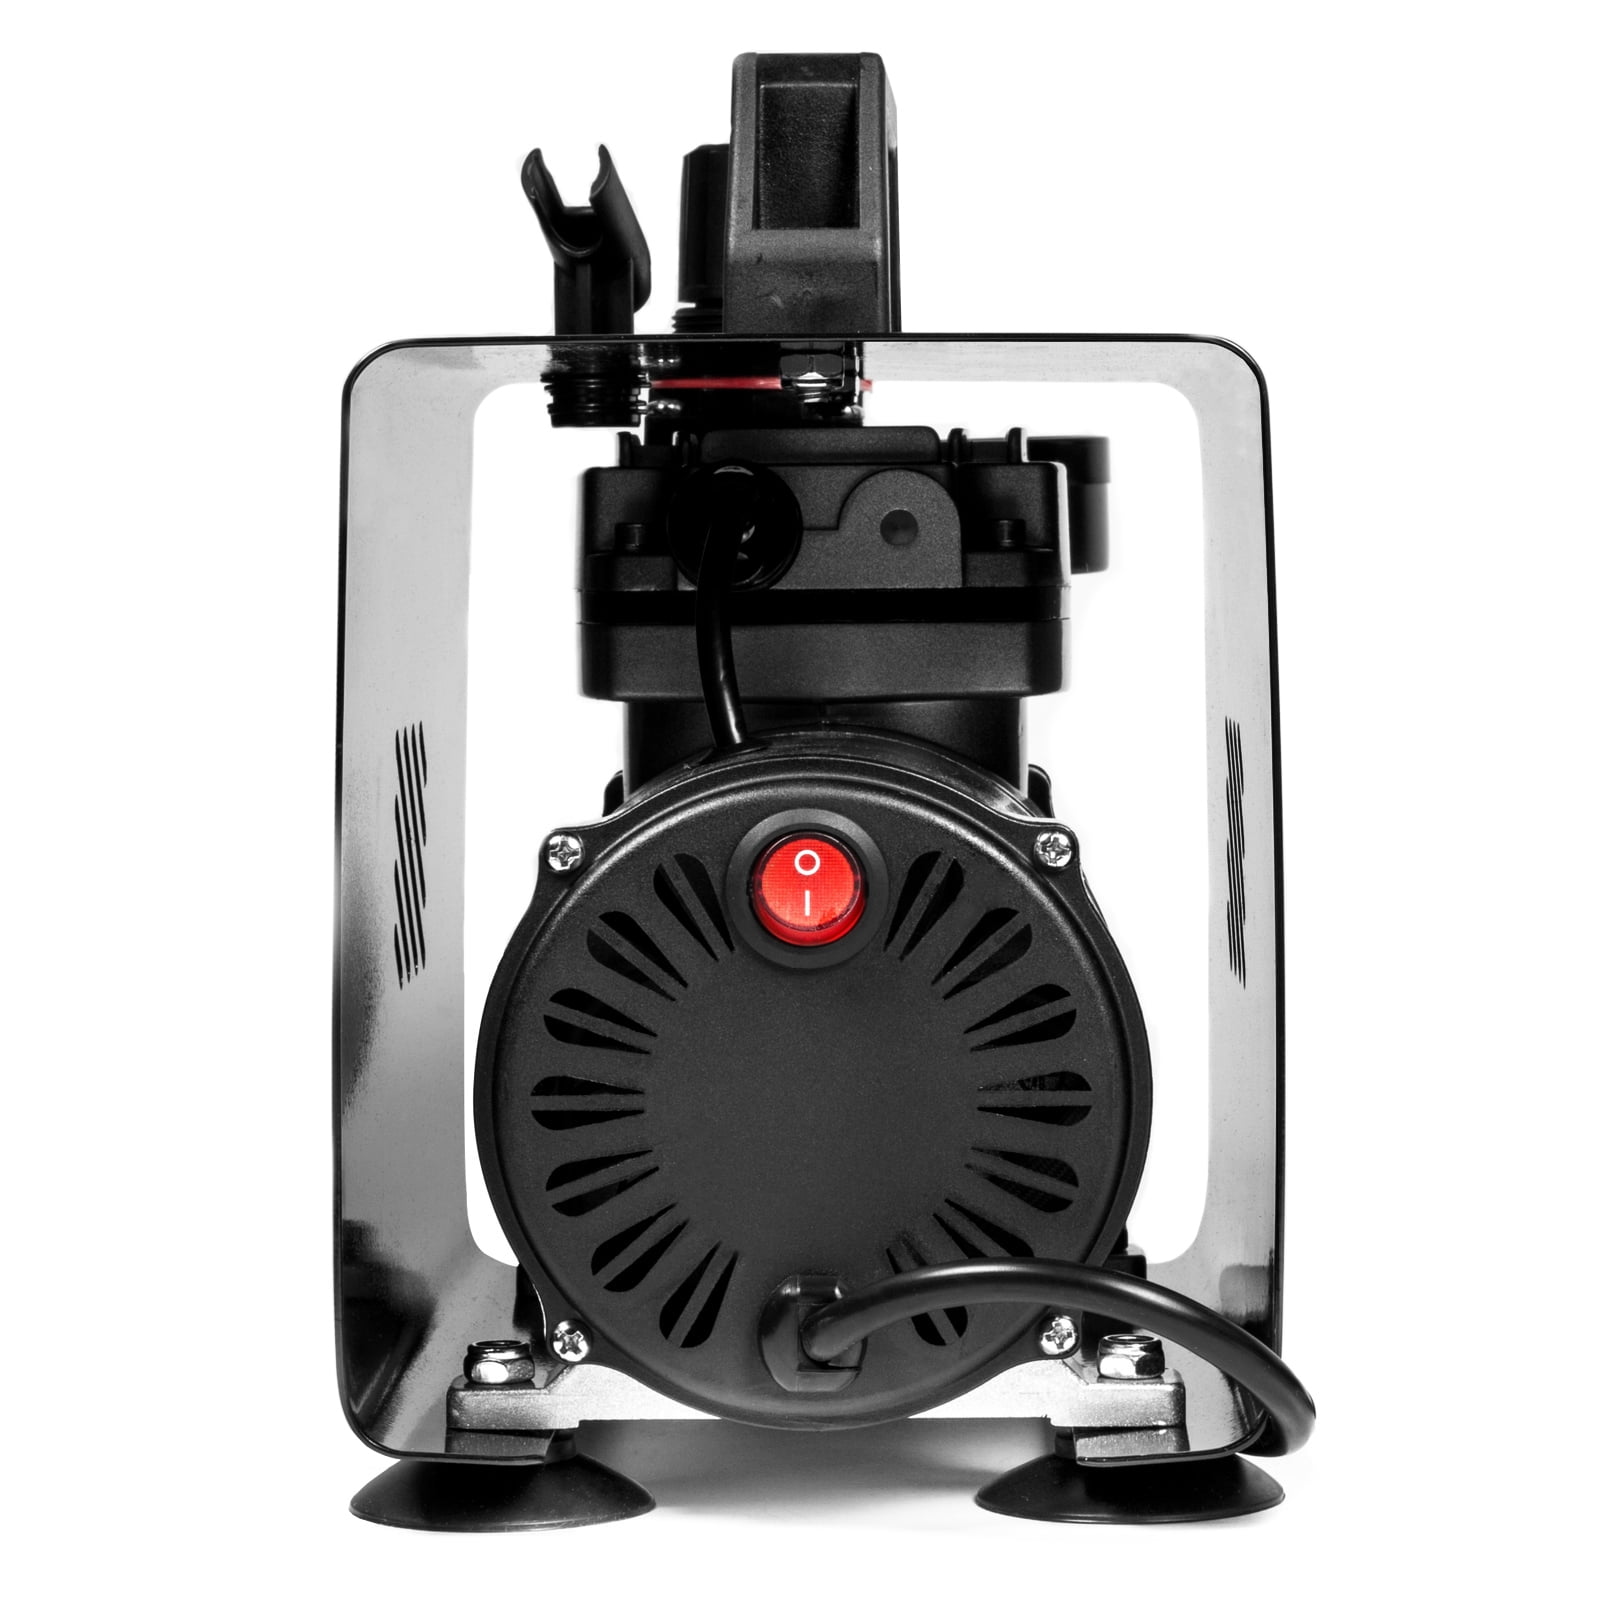 PointZero 1/5 HP Airbrush Compressor - Portable Quiet Hobby Tankless  Oil-less Air Pump with Cover - Point Zero Airbrush